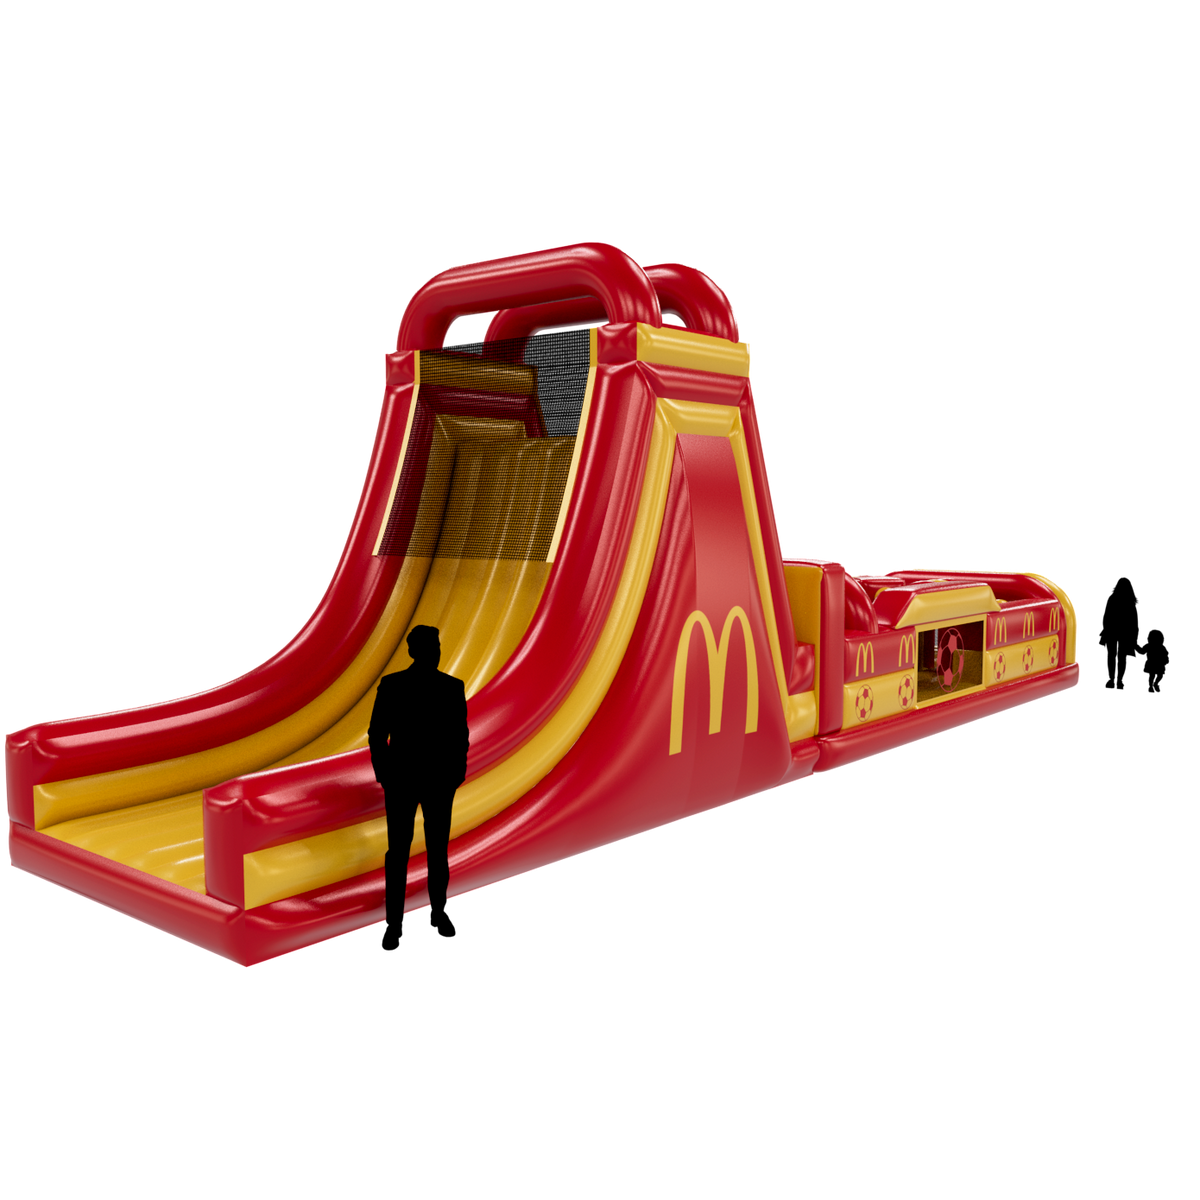 McDonald's obstacle course inflatable